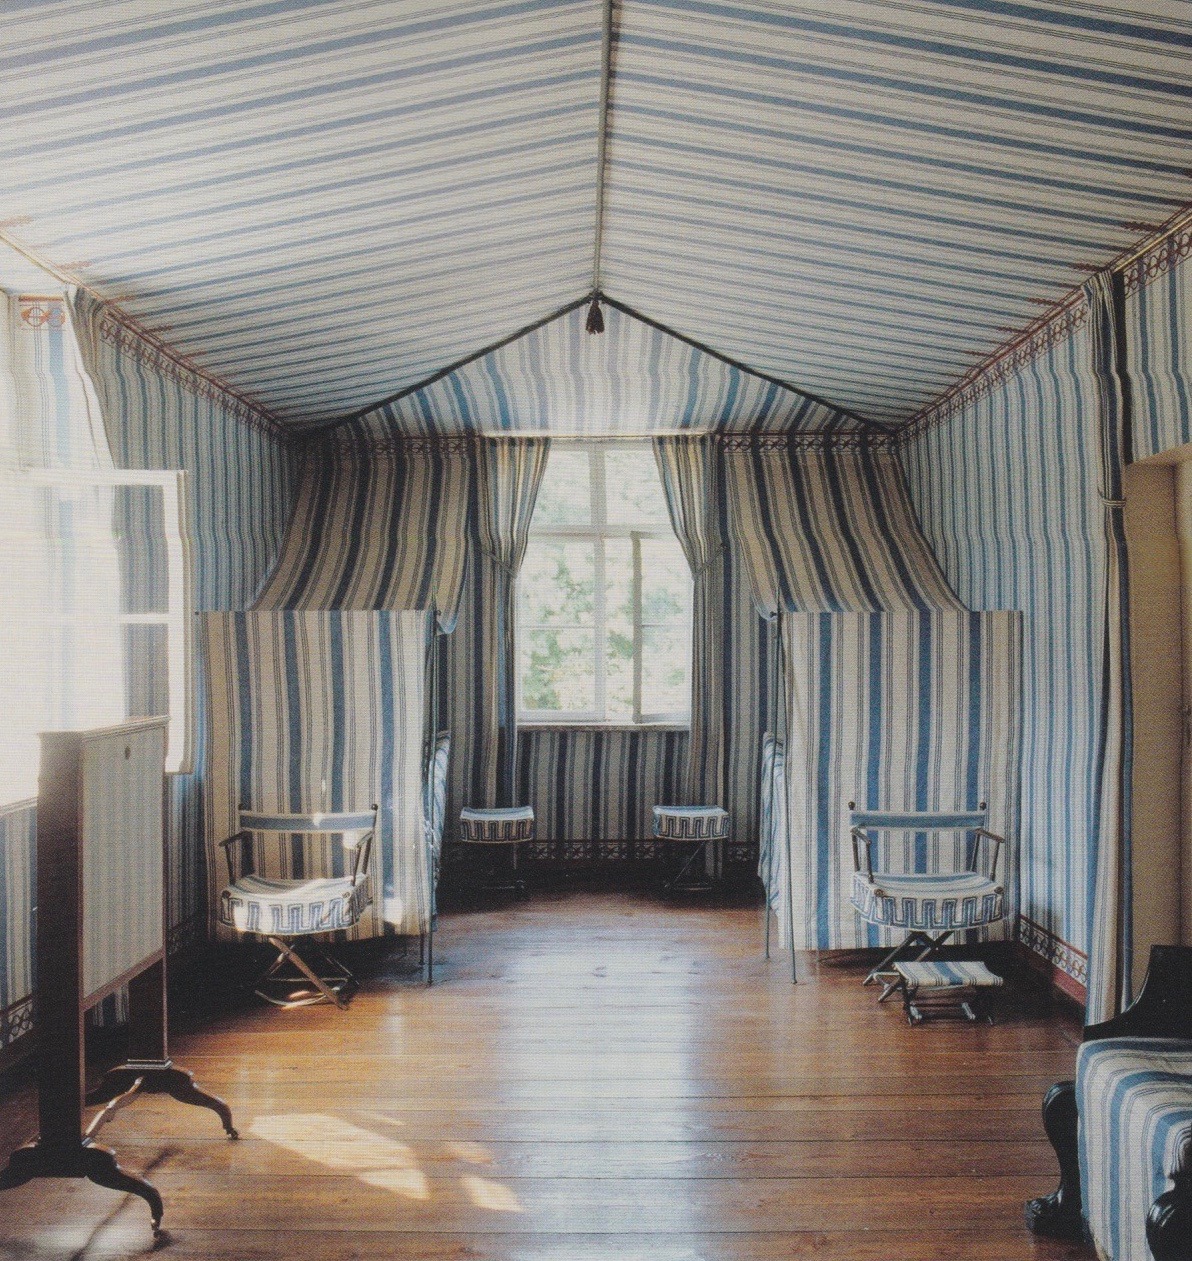 The Tent Room at Charlottenhof, the summer retreat crafted by architect Karl Friedrich Schinkel for Crown Prince Frederick William 